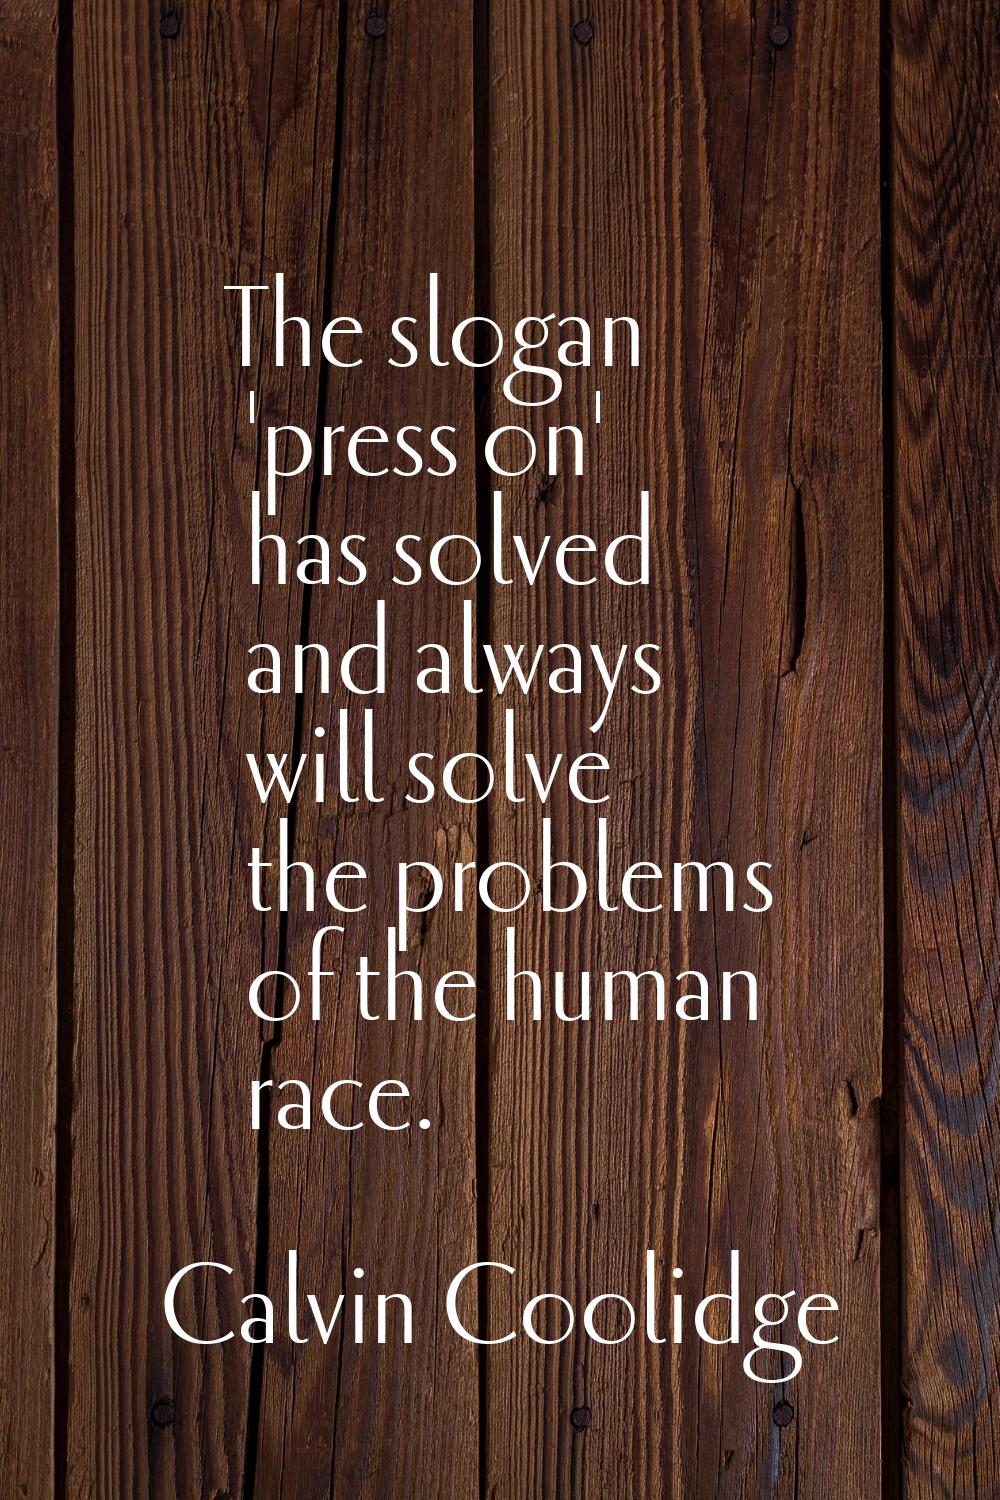 The slogan 'press on' has solved and always will solve the problems of the human race.